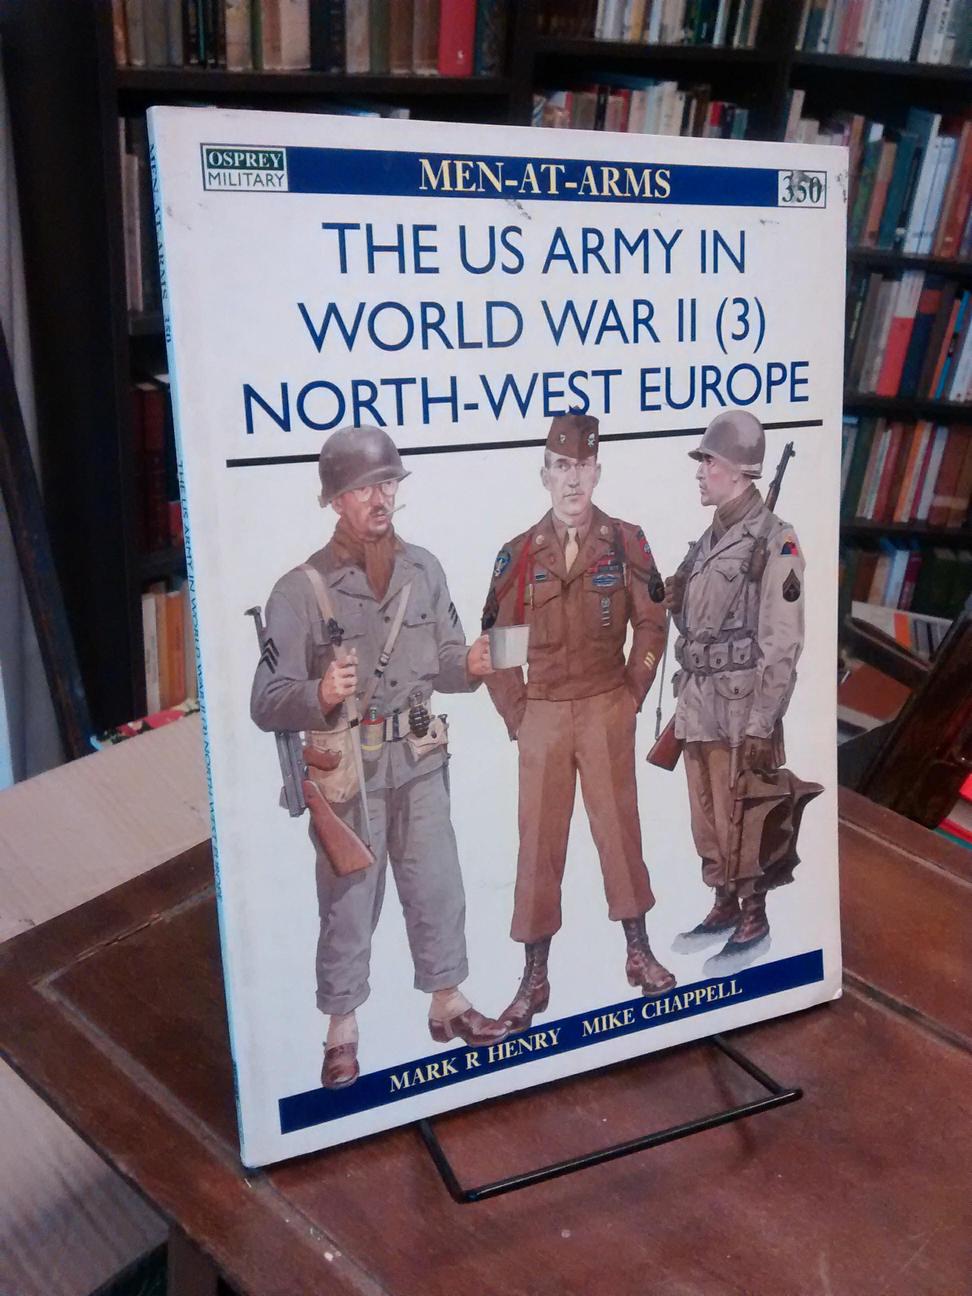 The US Army In World War II (3). North-West Europe - Mark R. Henry · Mike Chappell